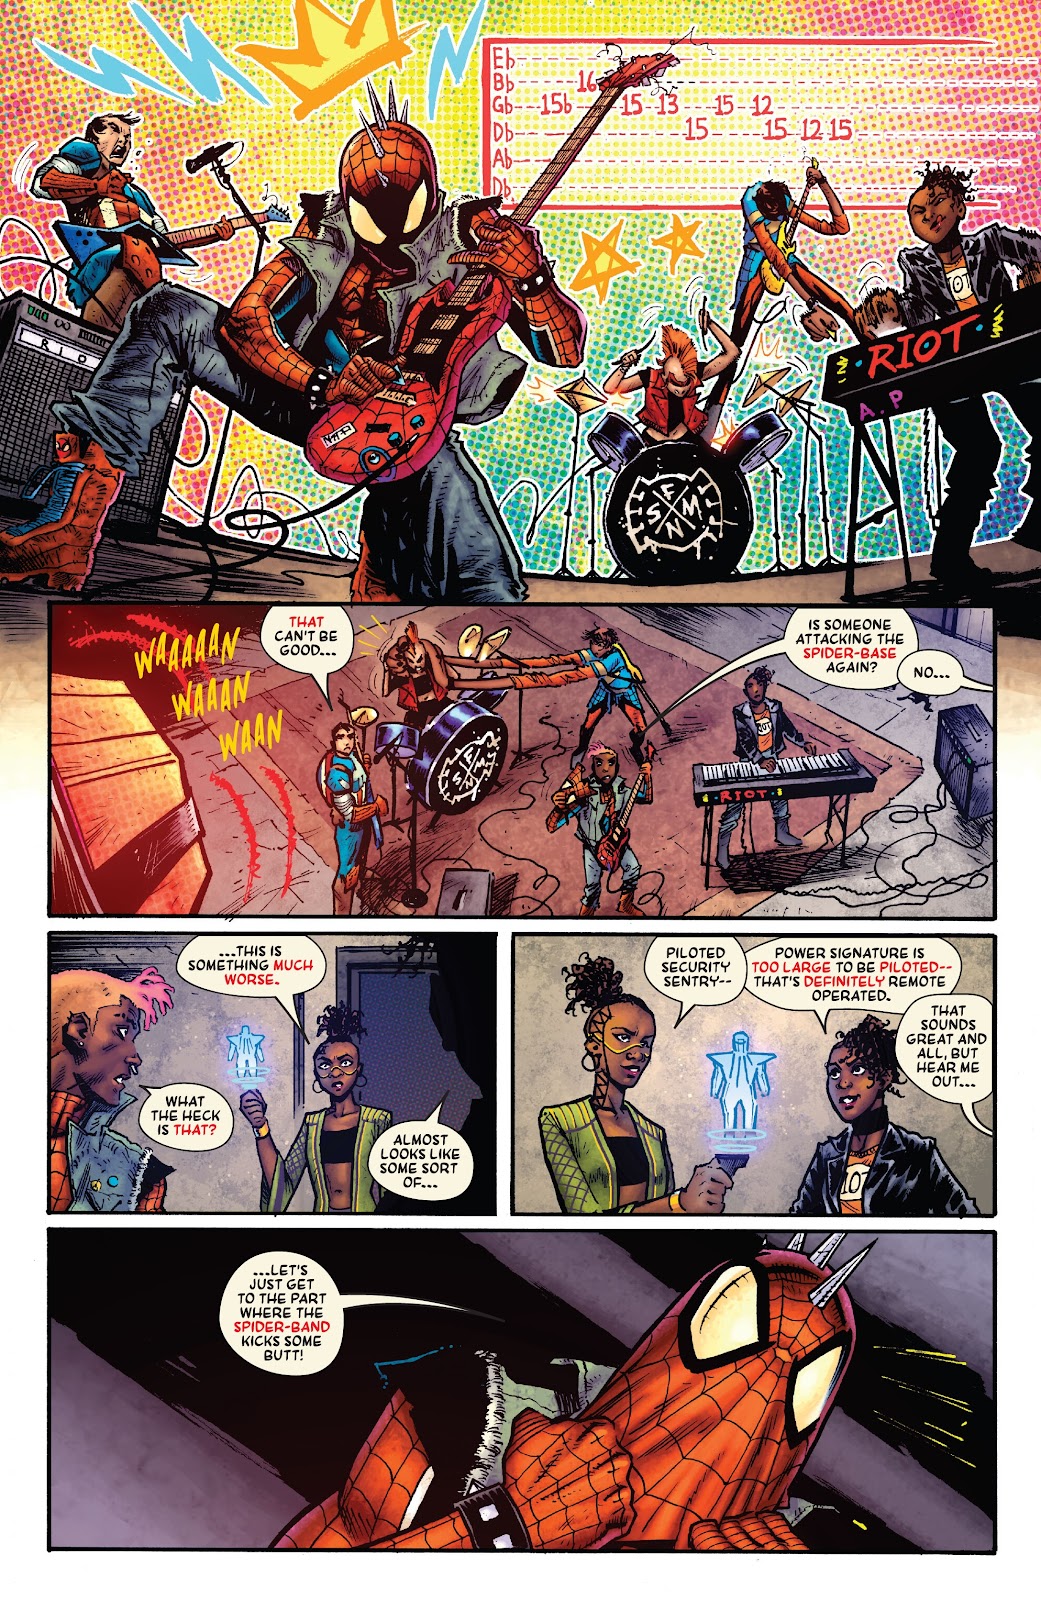 Spider-Punk: Arms Race issue 1 - Page 17